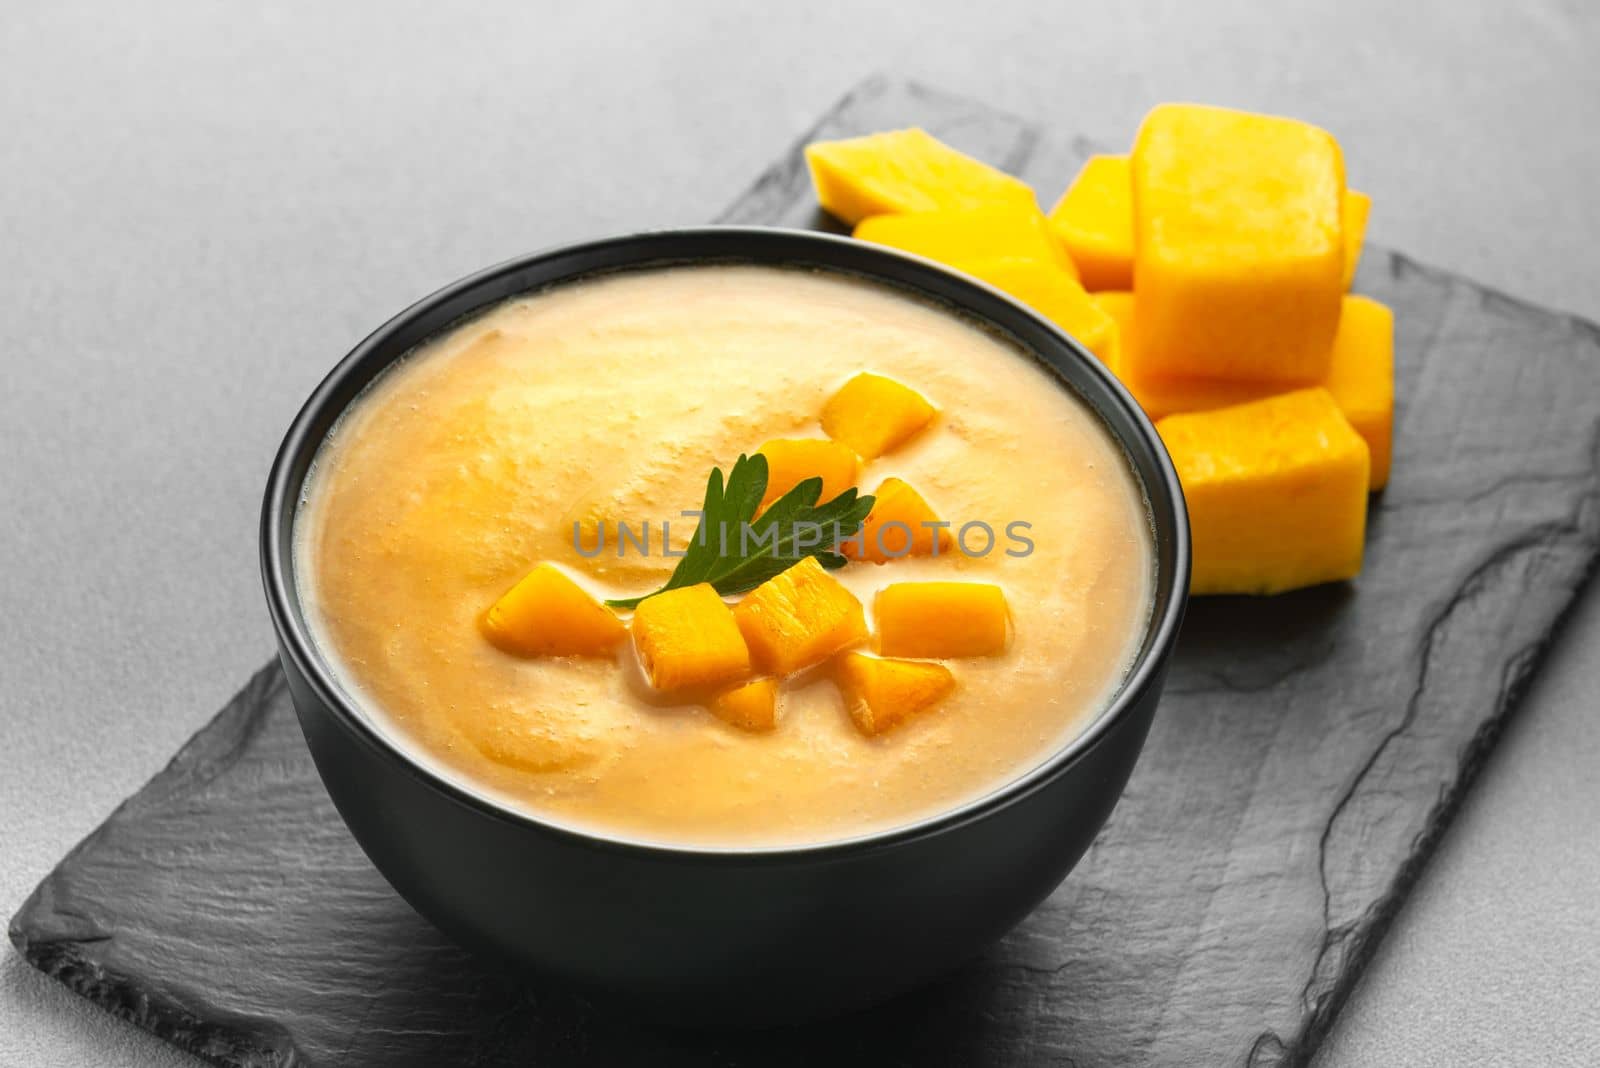 pumpkin cream soup mashed potatoes on a gray background. Vegan curried pumpkin lentil soup puree in a bowl. Space for text. Pescatarian Eating, Flexitarian Eating, Reducetarian Eating